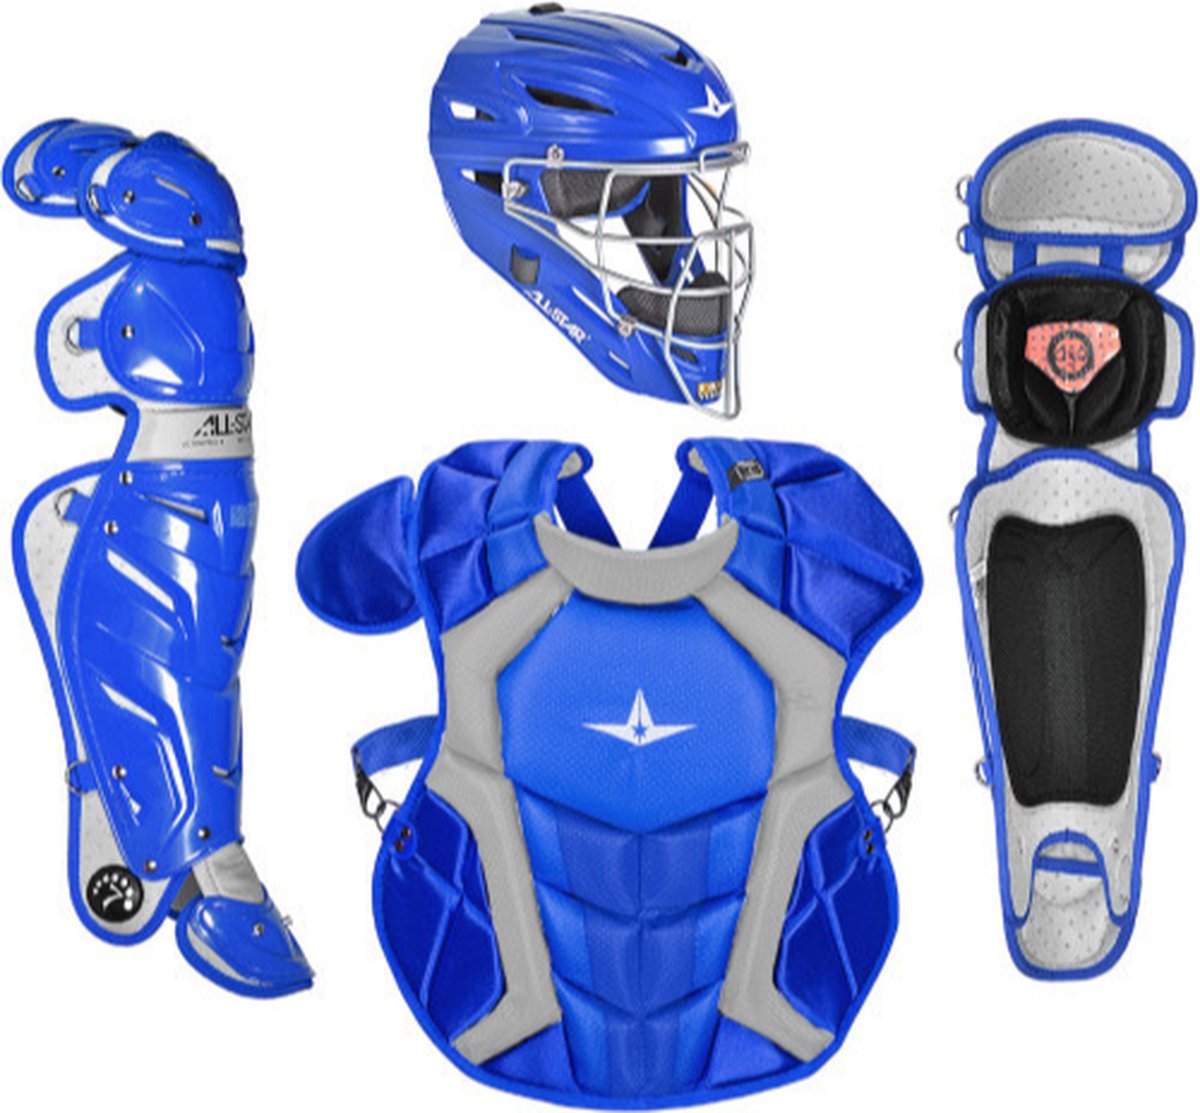 All Star CKCCPRO1 Professional Catcher's Kit Color Royal